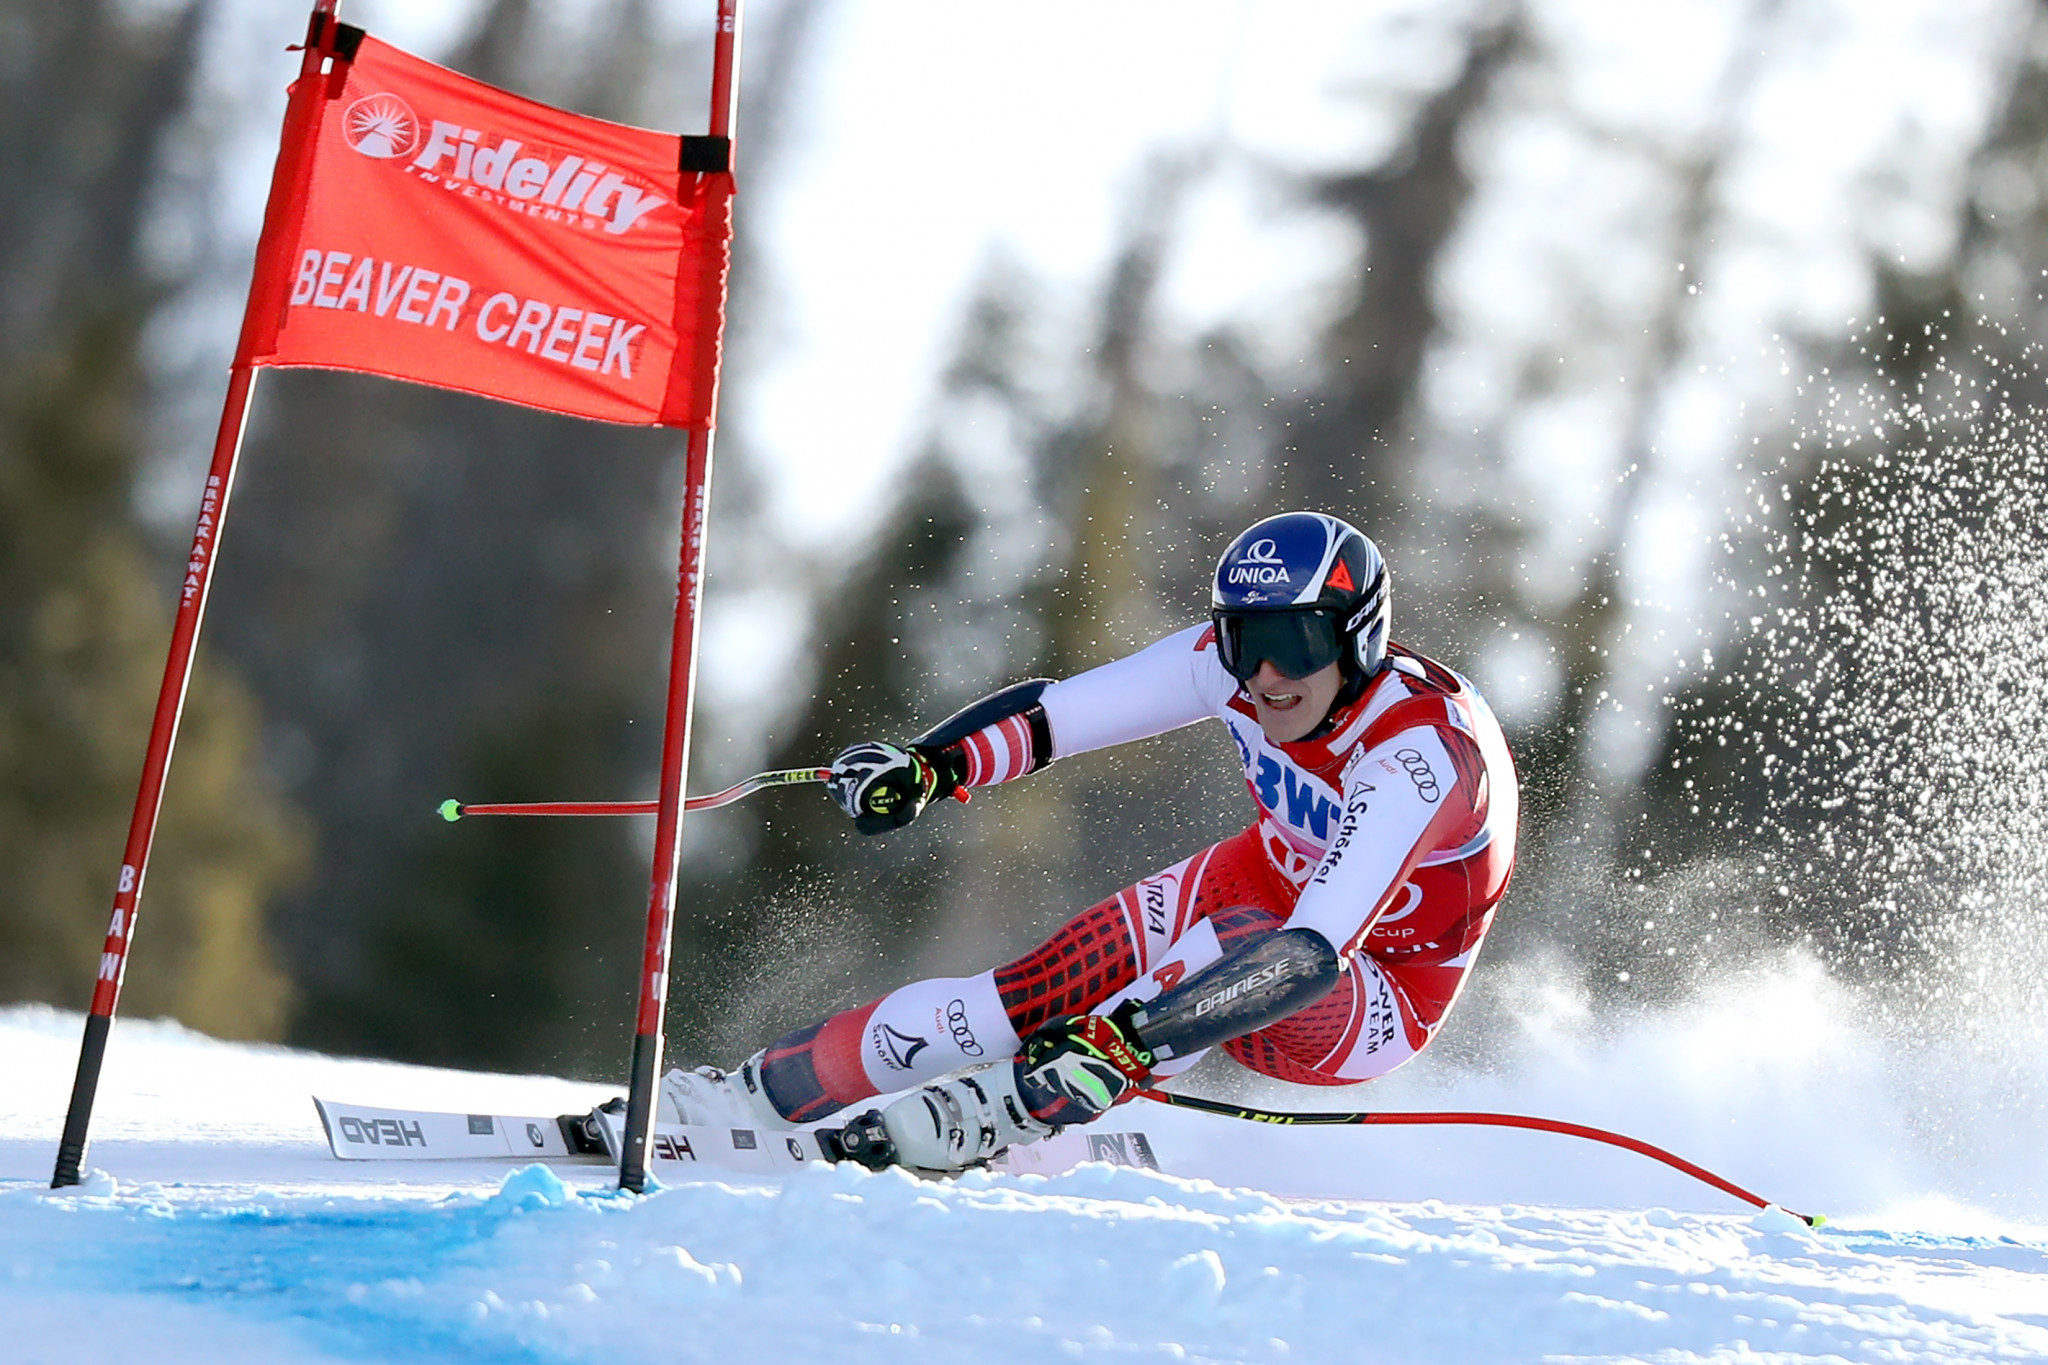 Olympic champion, Matthias Mayer of Austria, finished third in Beaver Creek ©Getty Images